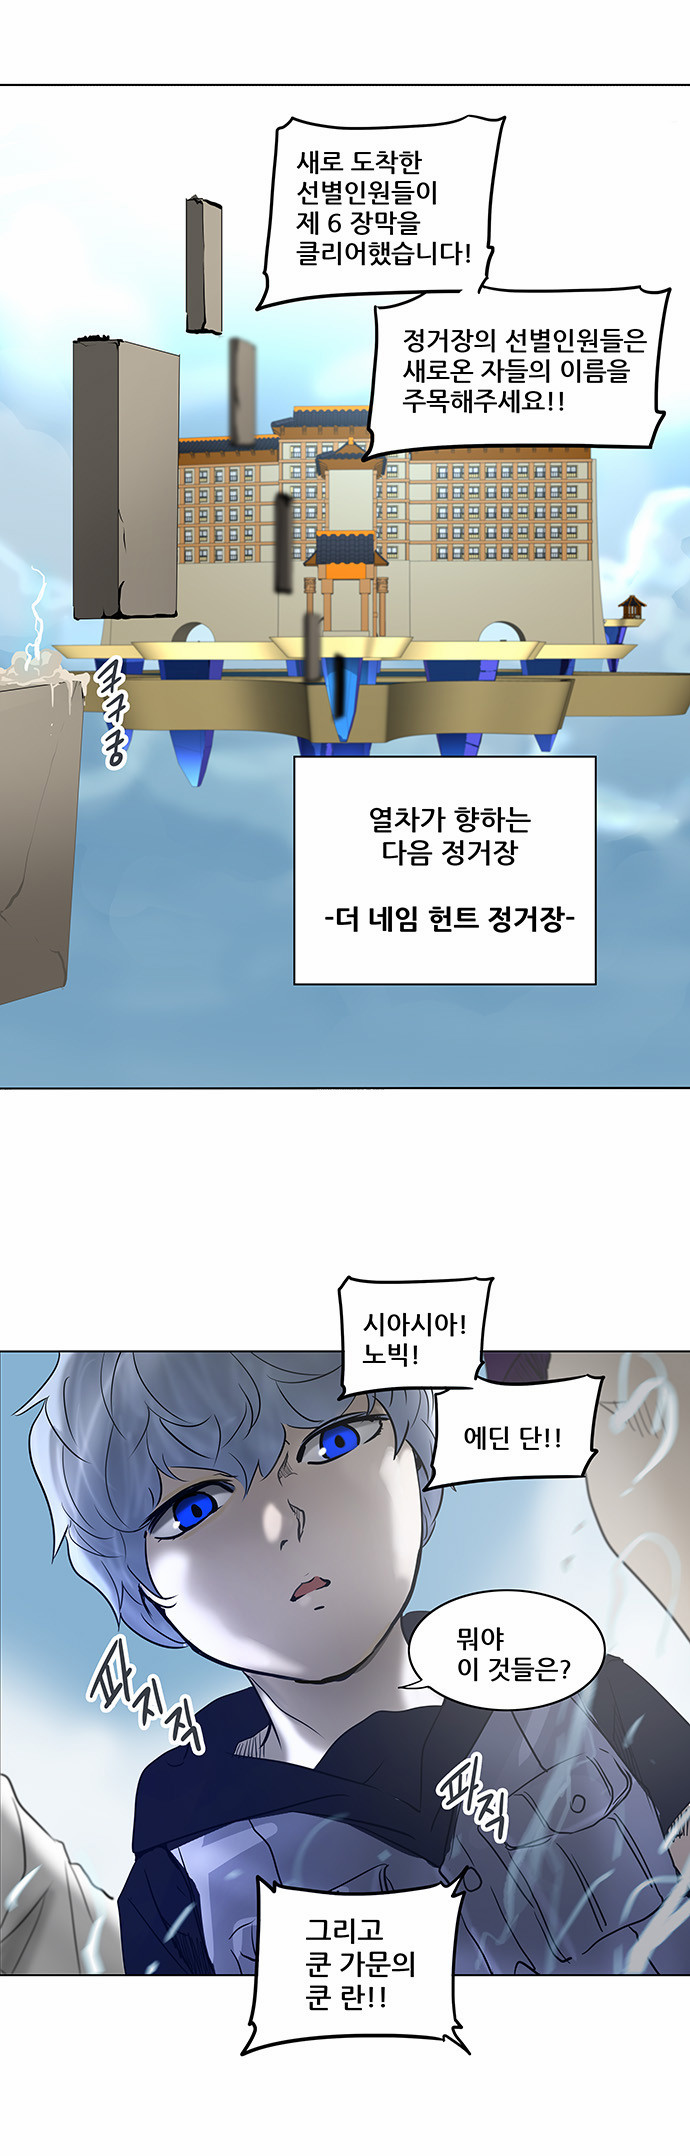 Tower of God - Chapter 280 - Page 1